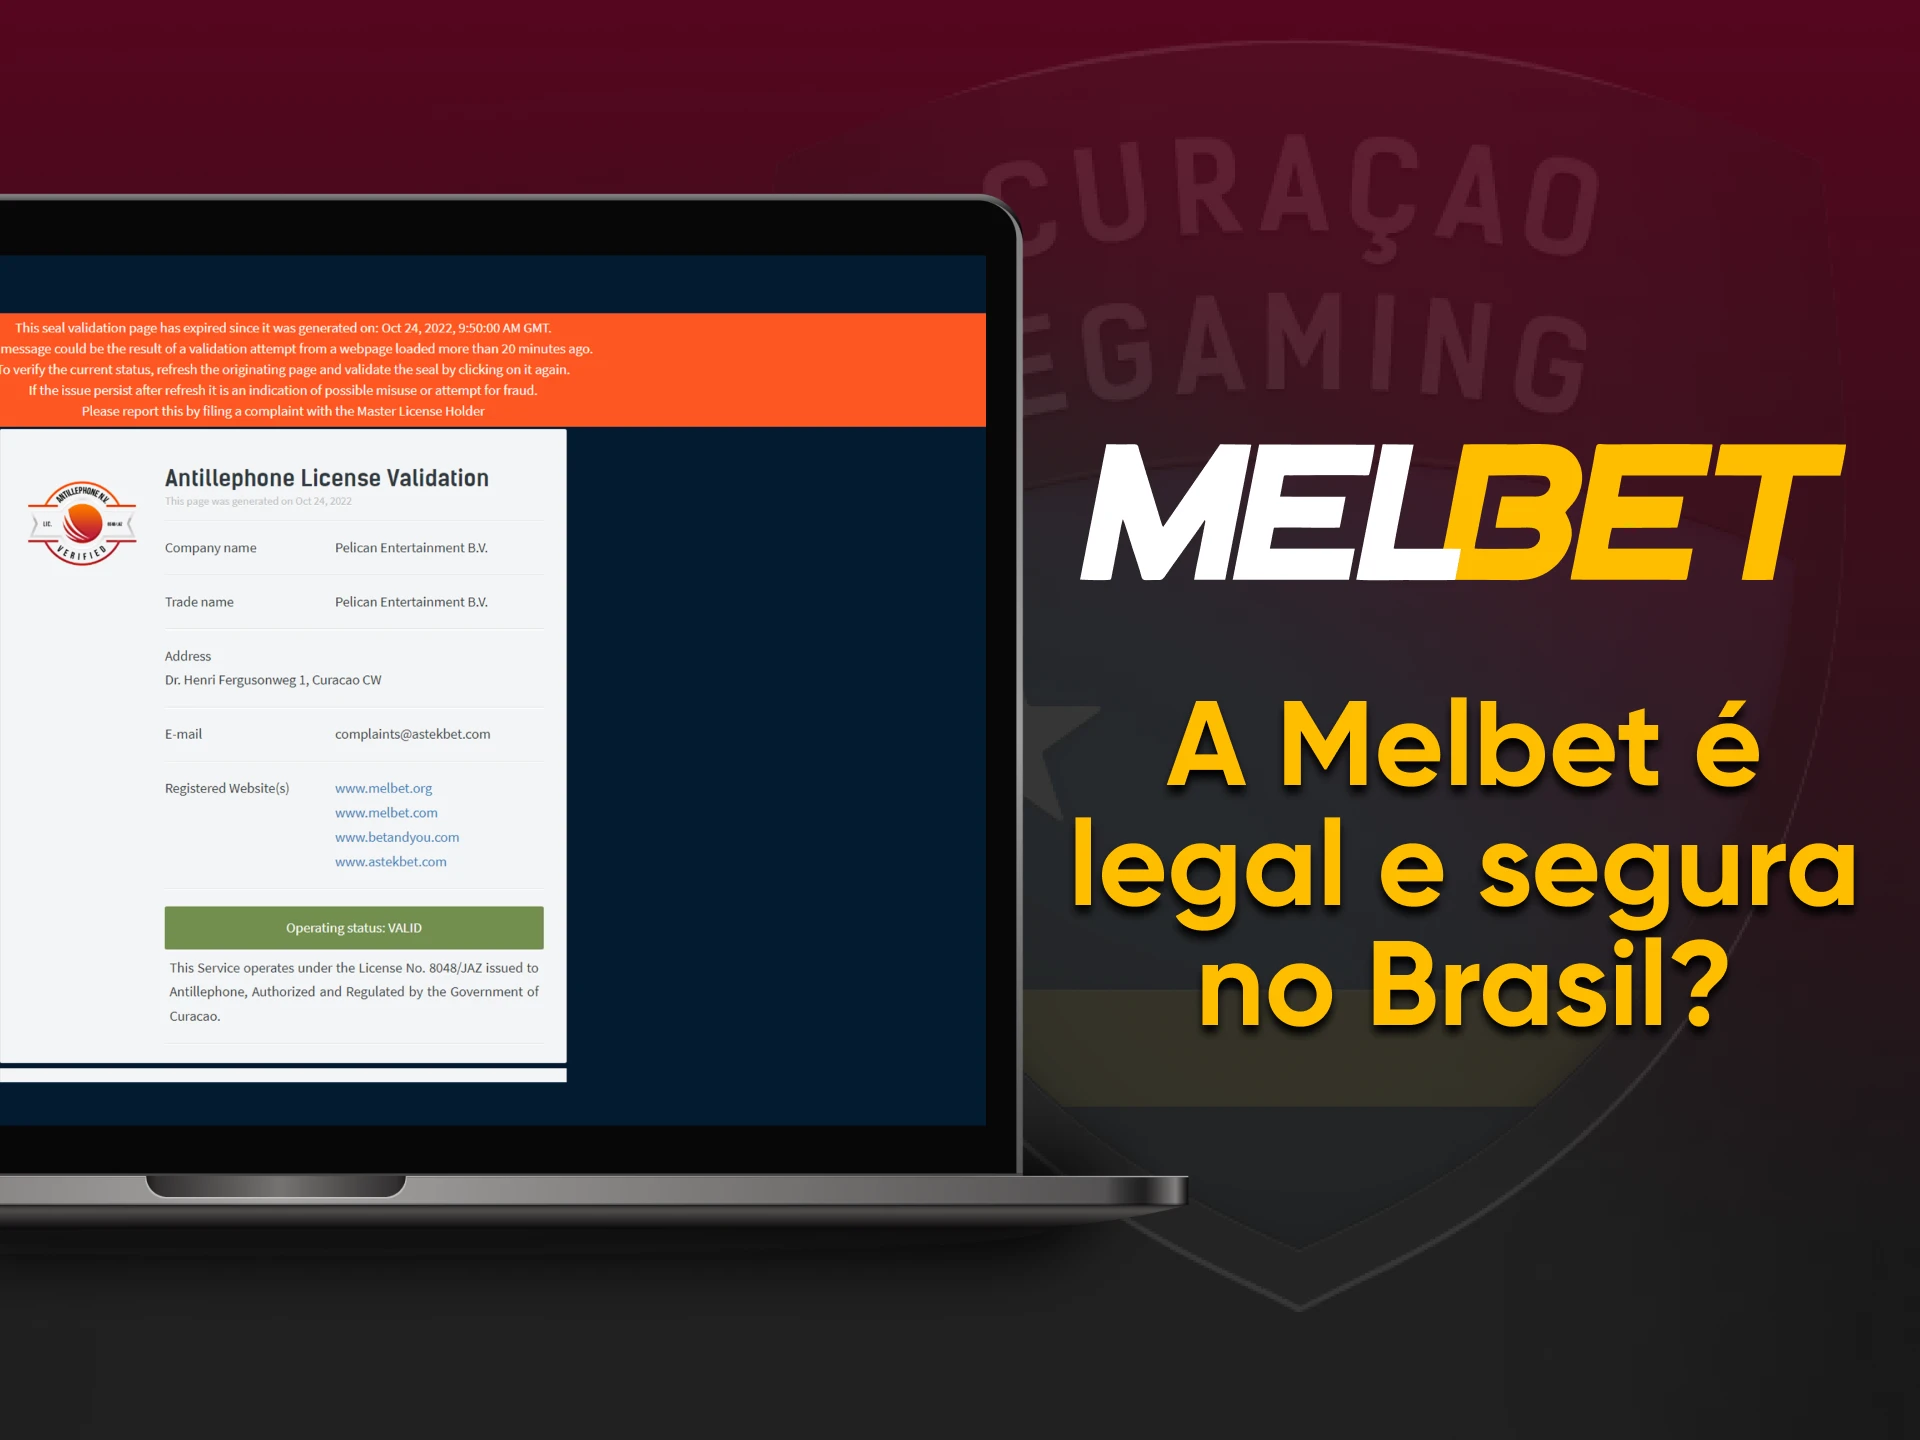 Melbet can be used in Brazil.